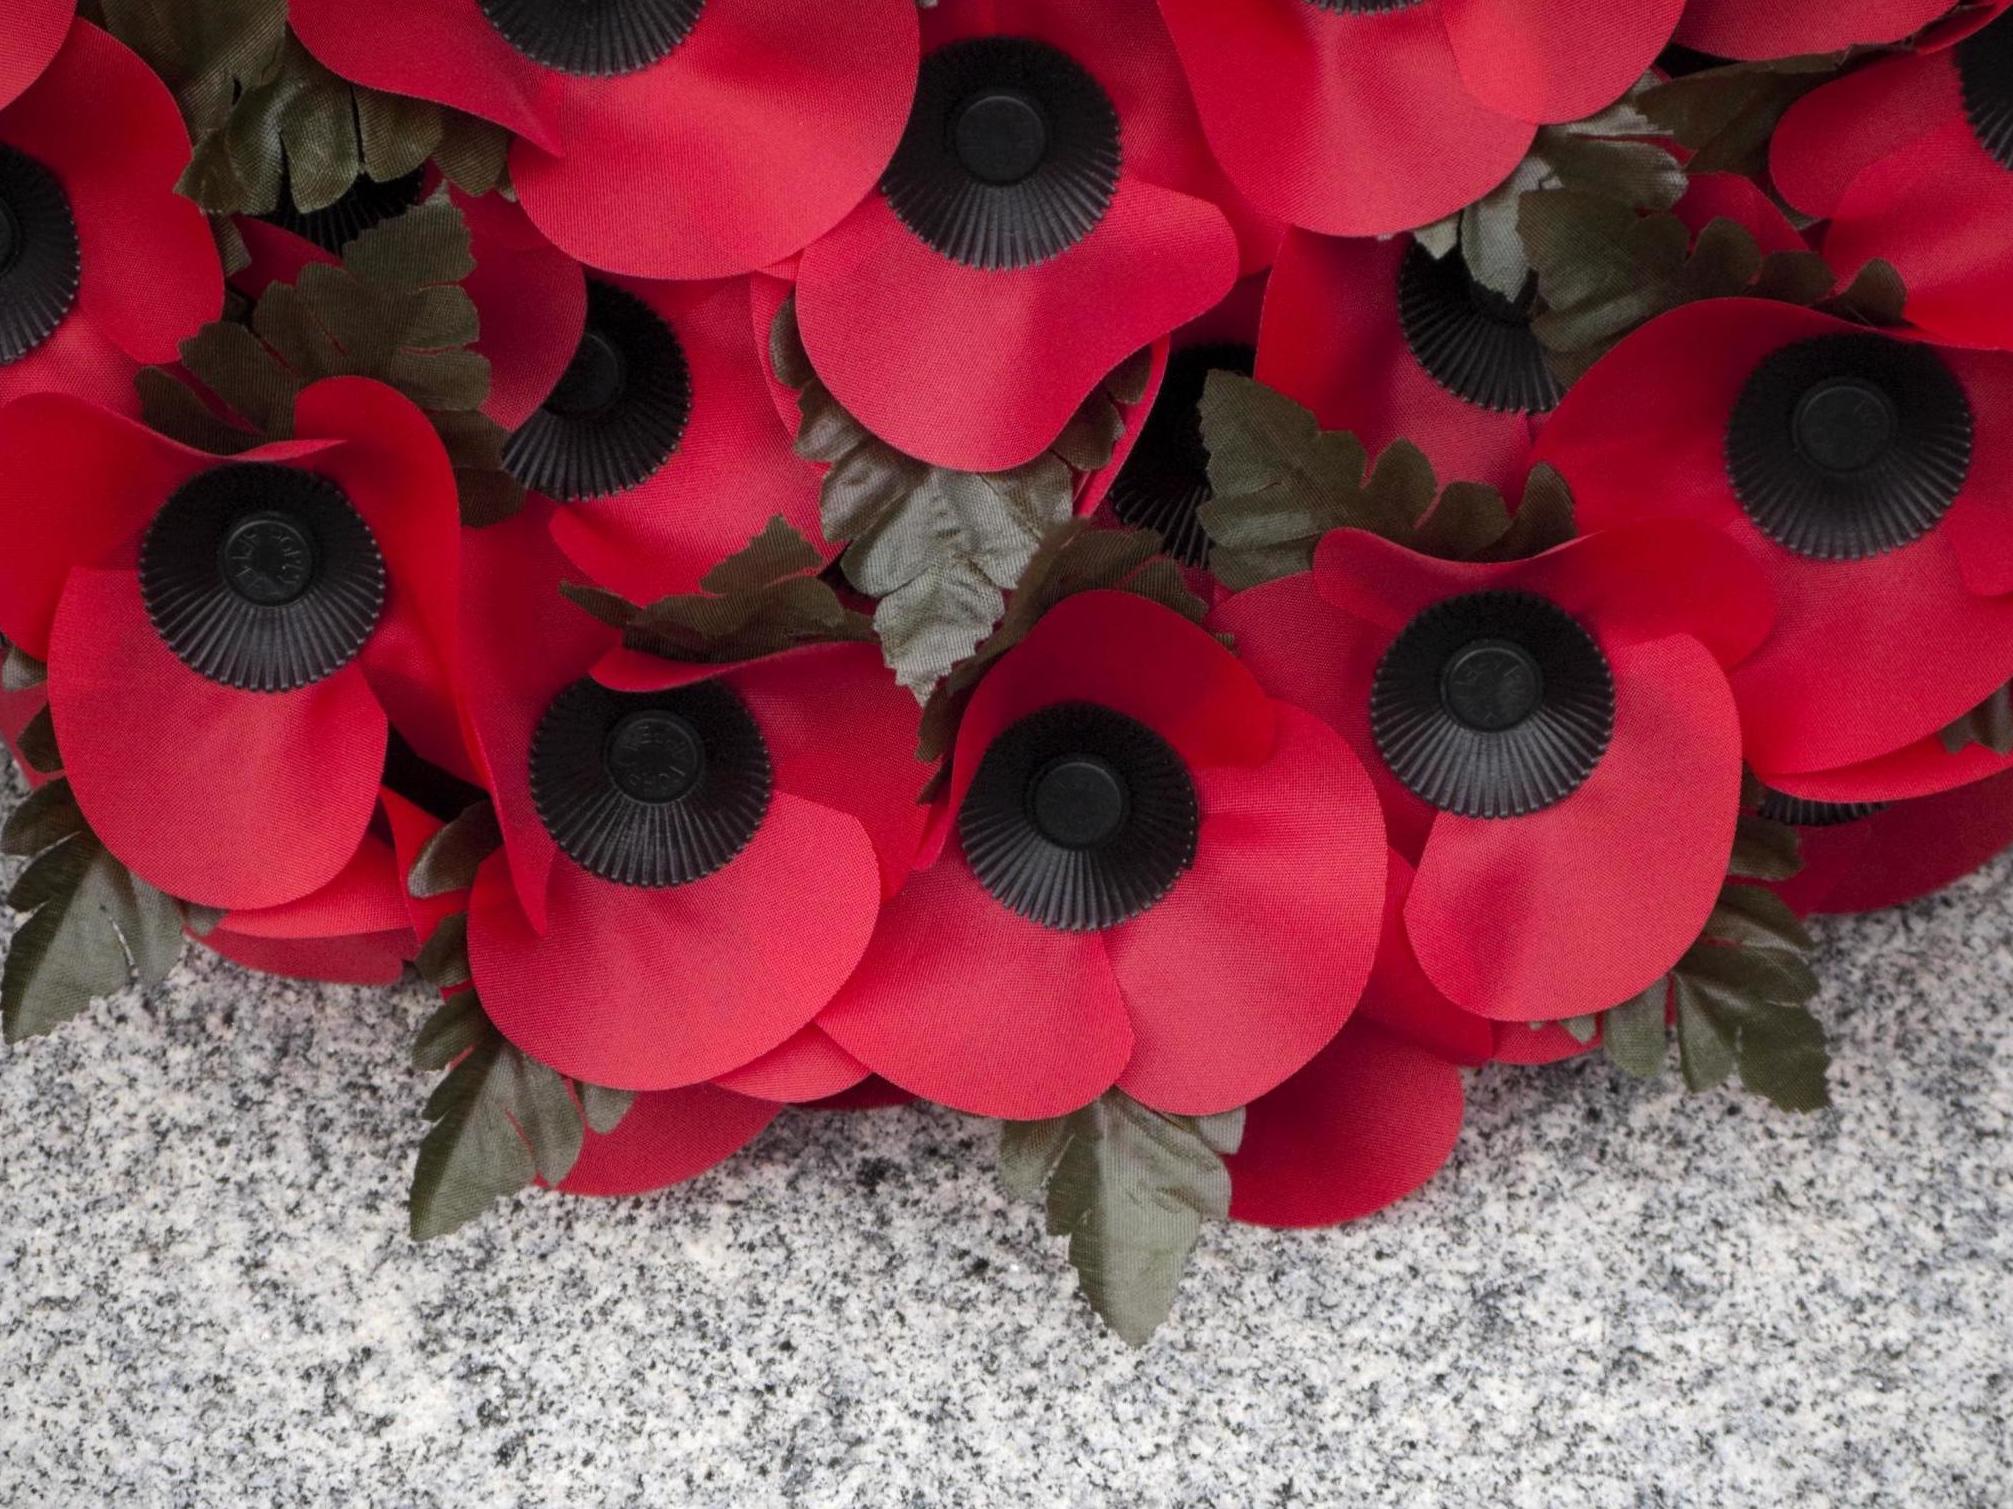 Red poppy to civilian victims for first time | The Independent | The Independent